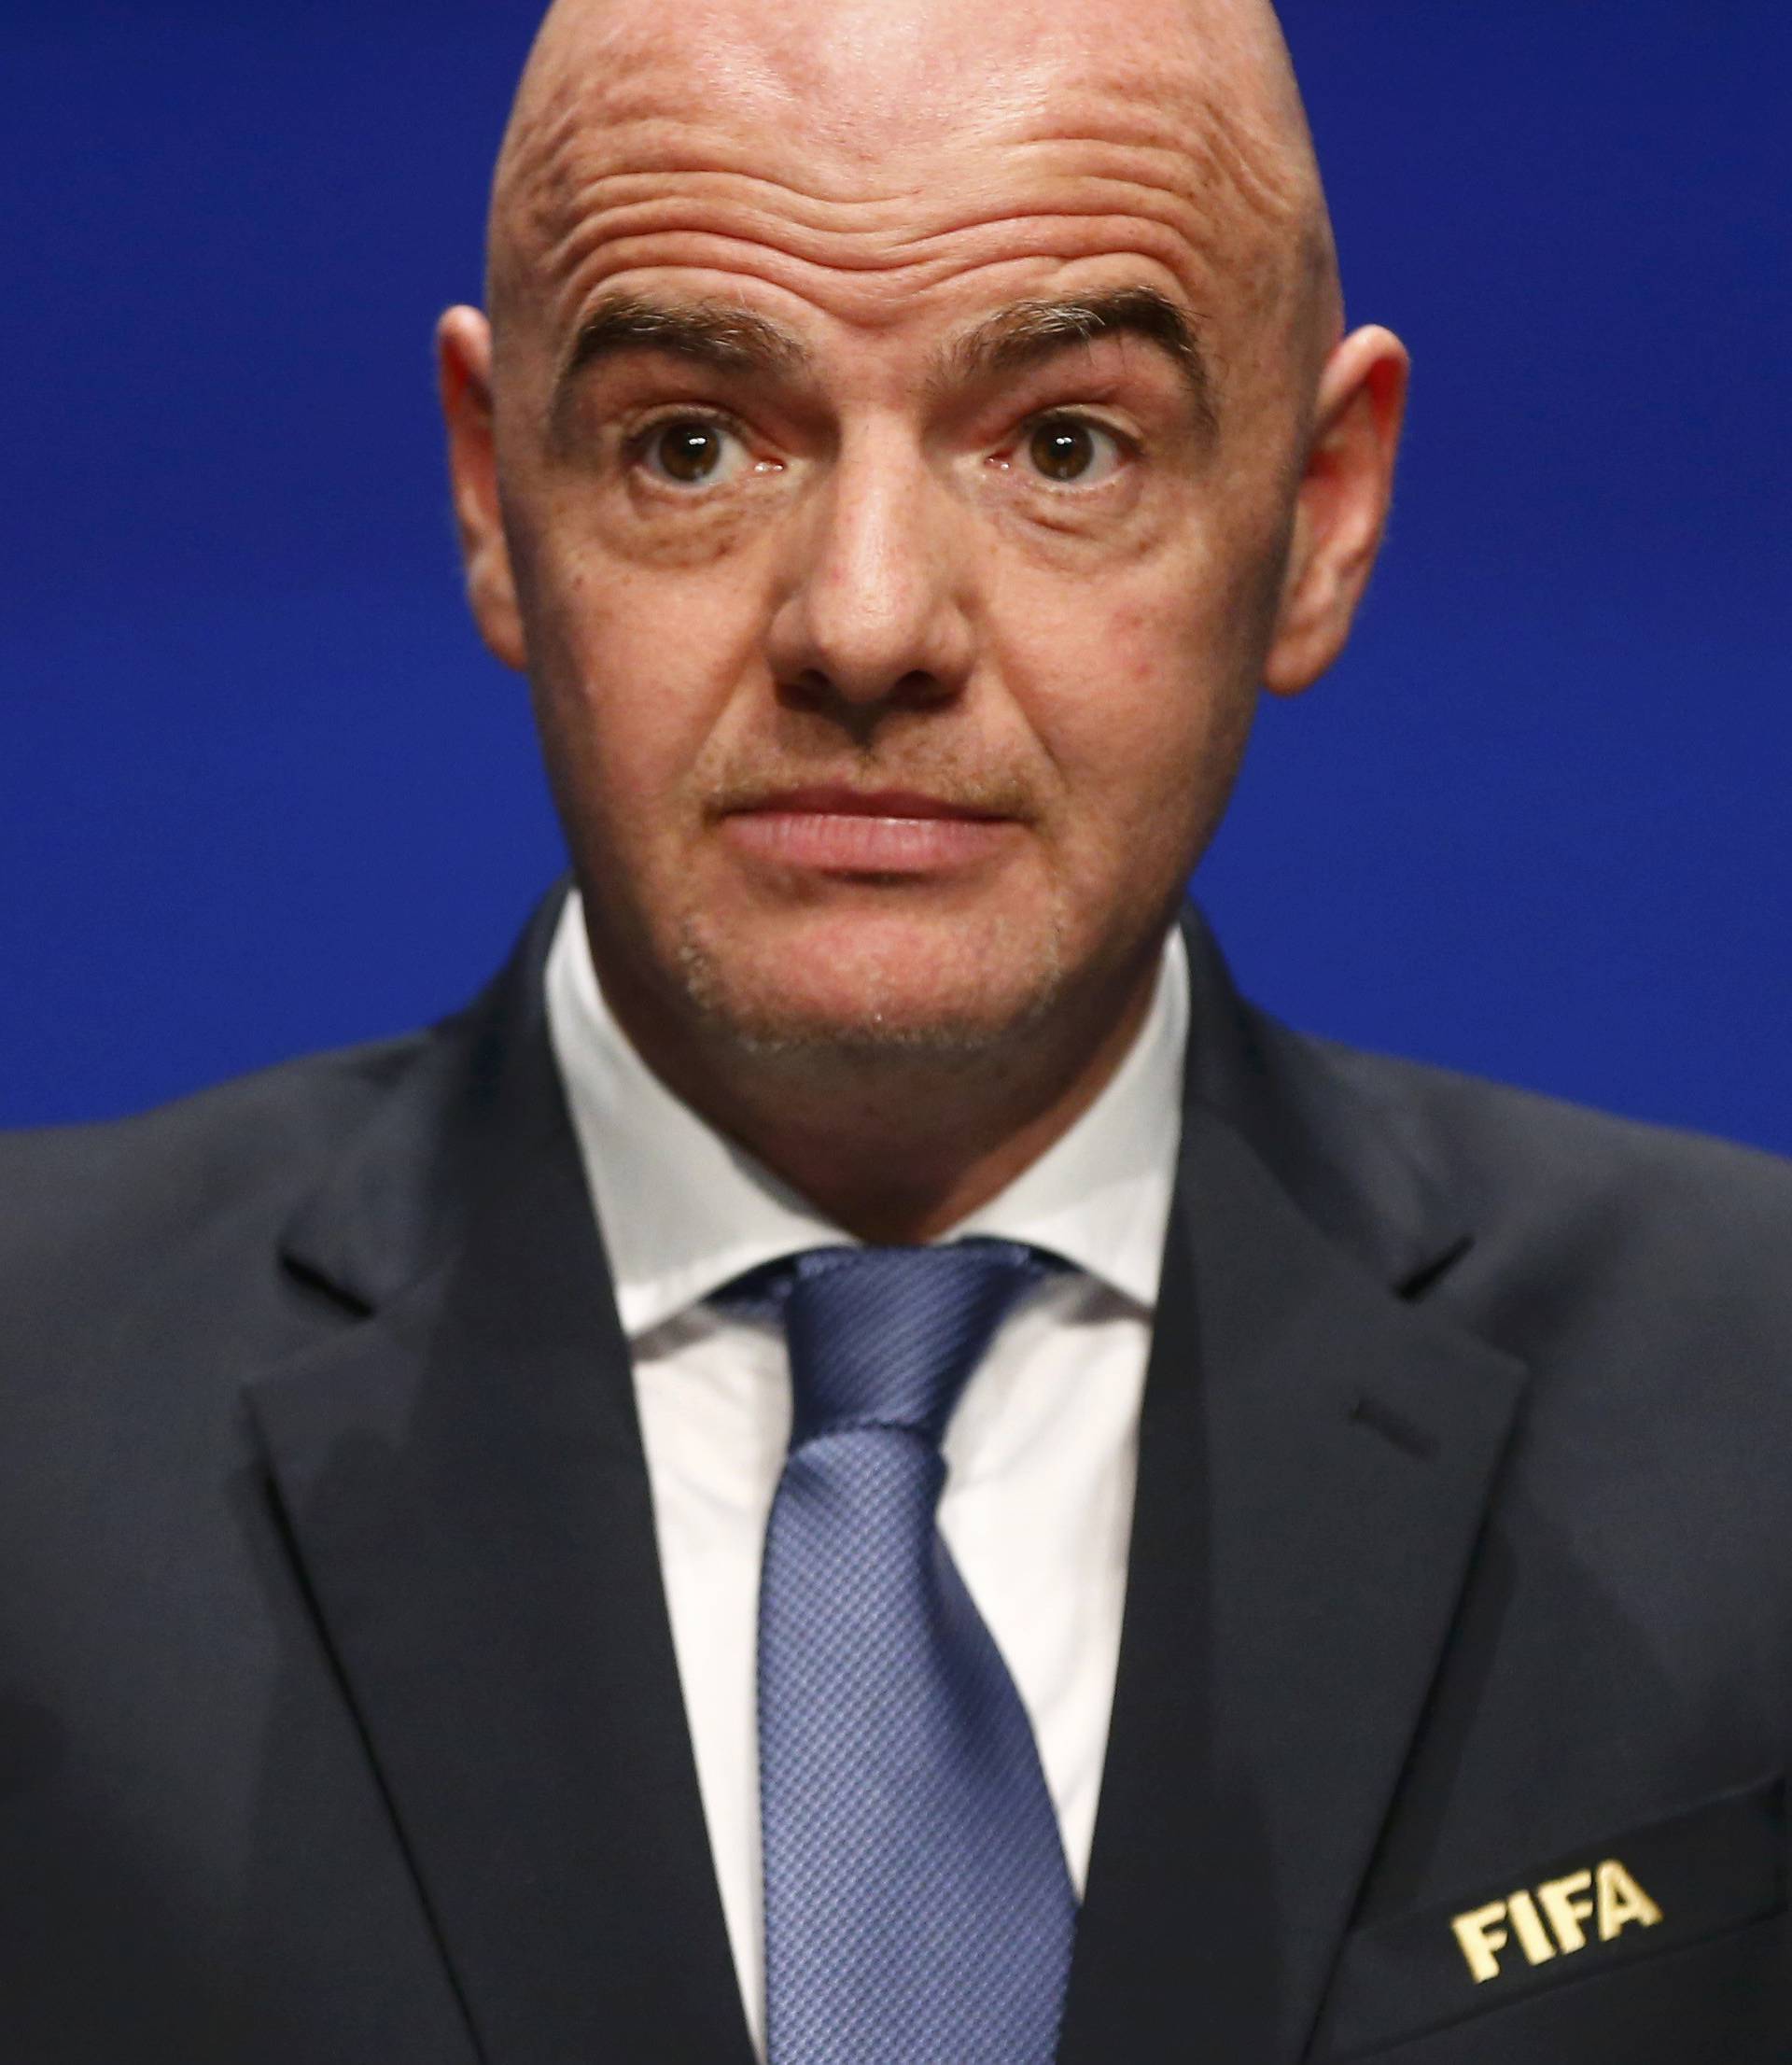 FIFA President Infantino addresses a news conference after a FIFA Council in Zurich